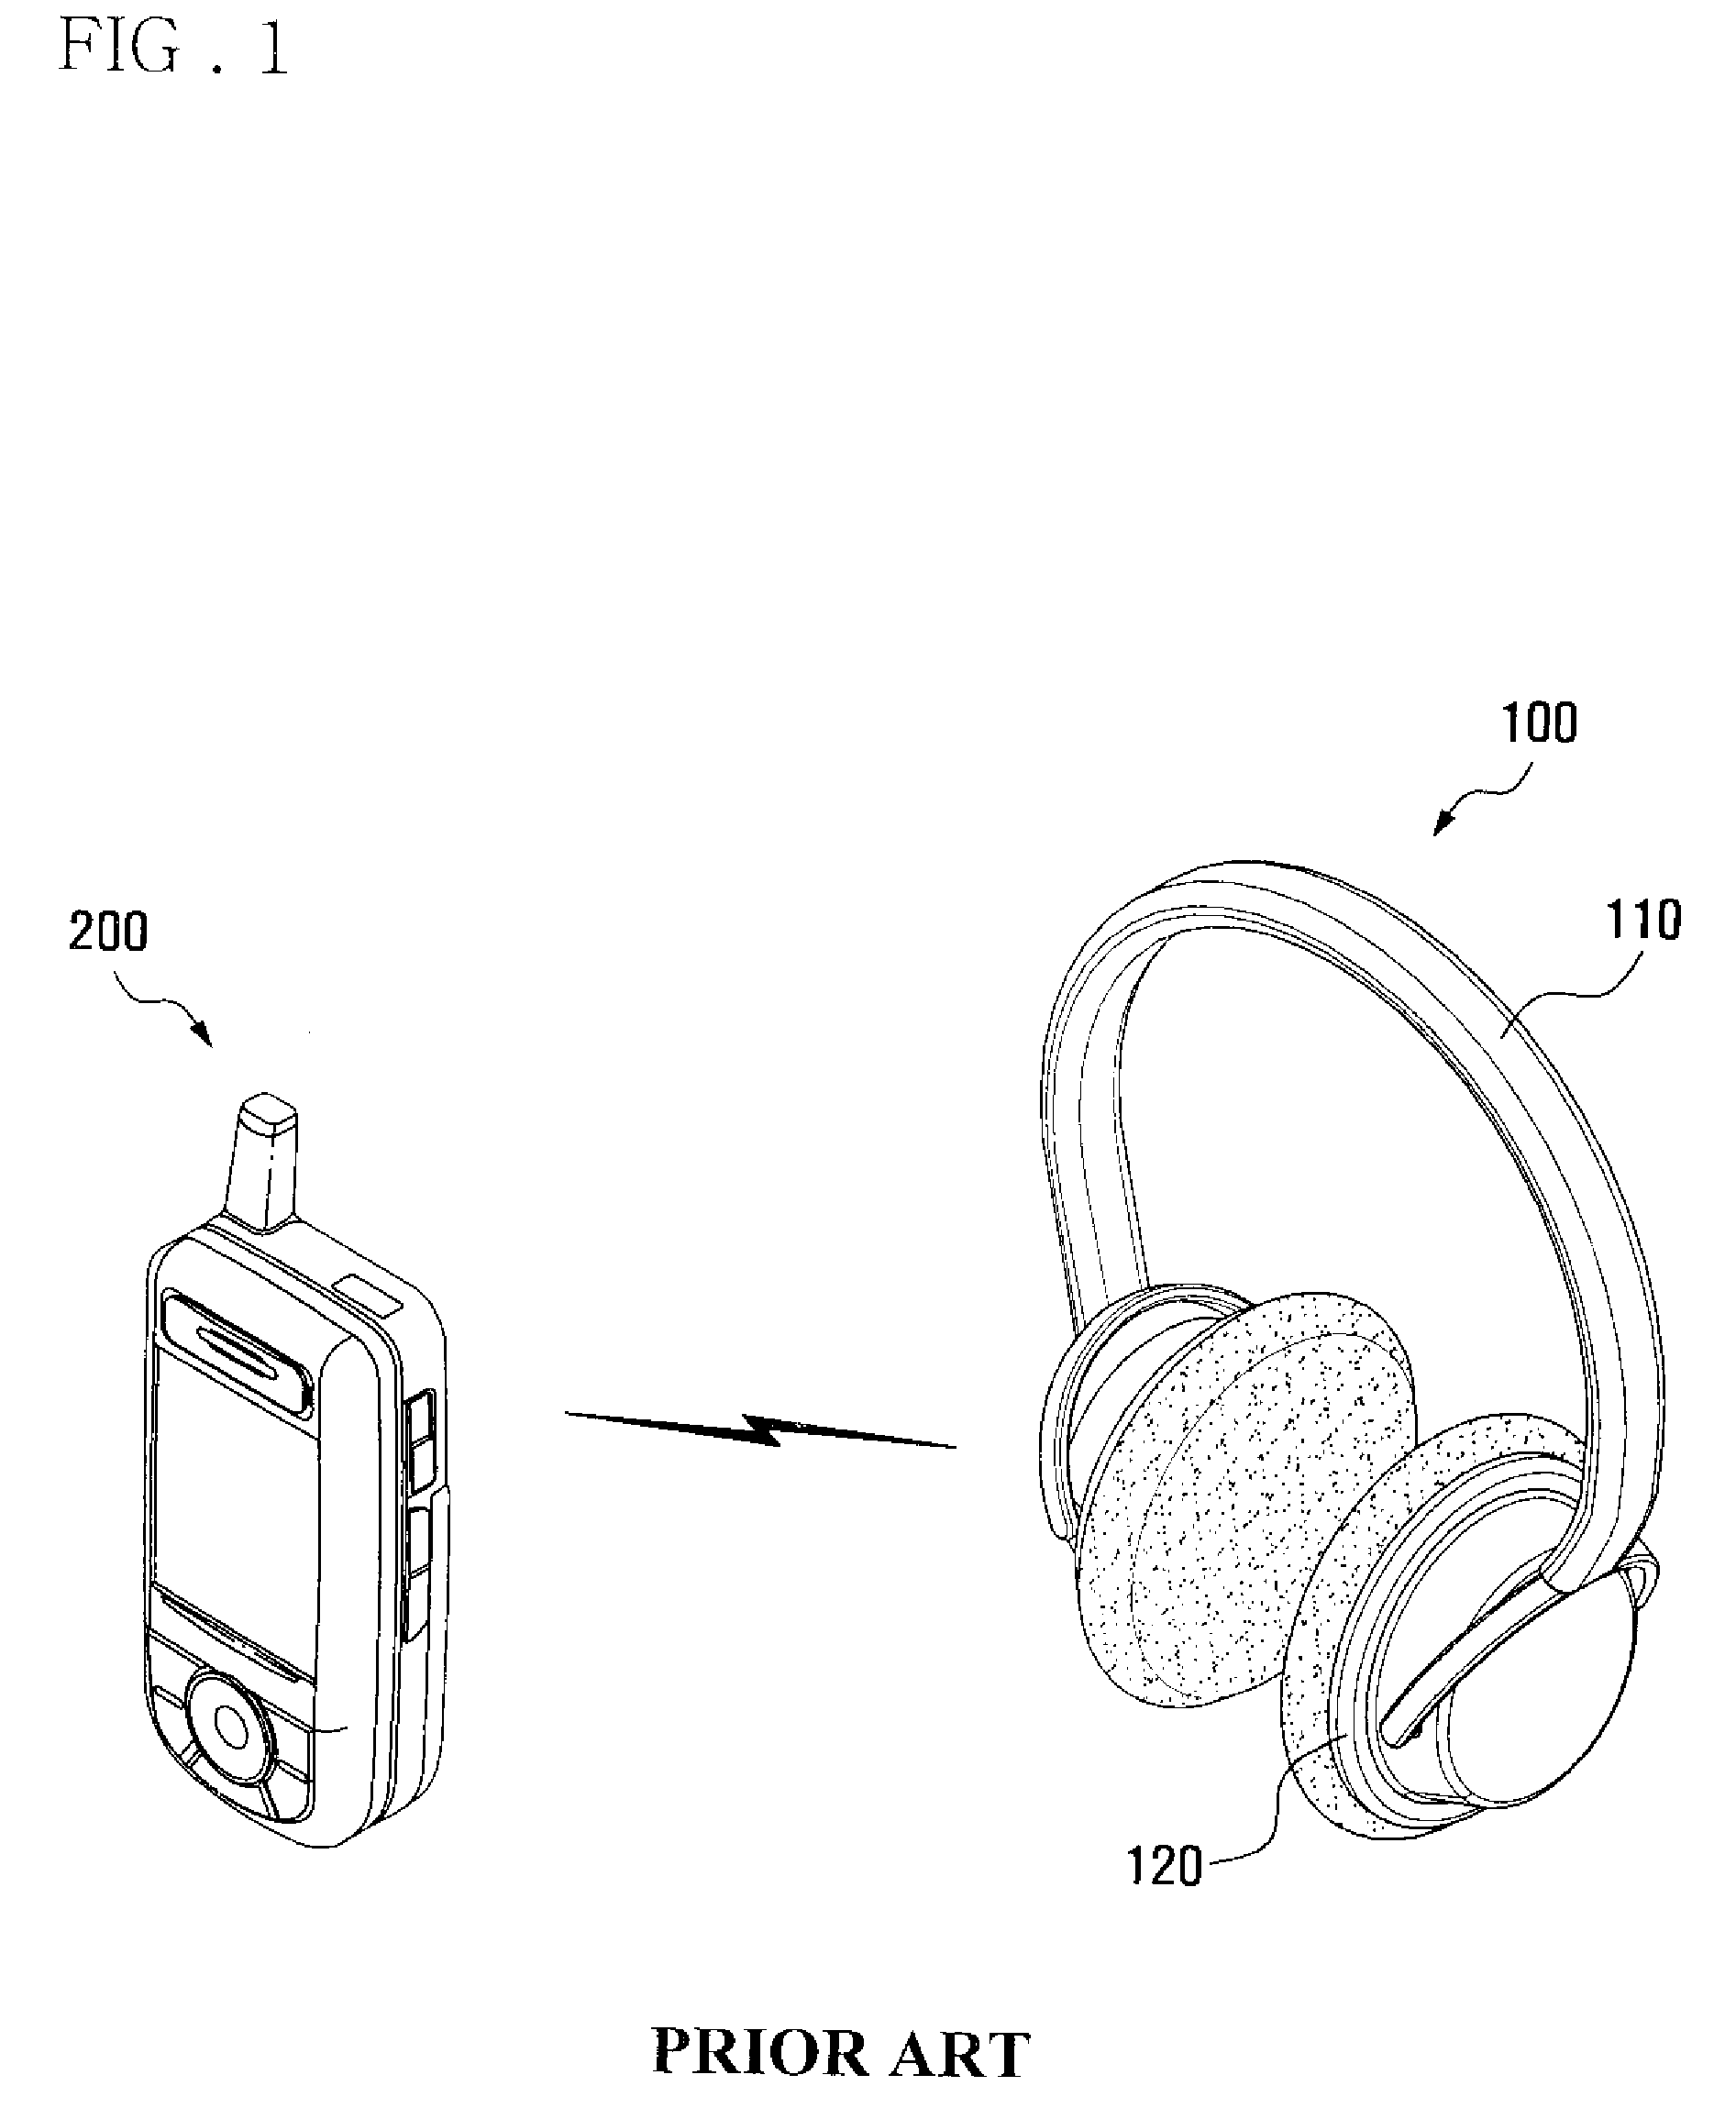 Headset capable of being used as external speaker and method for adjusting output an thereof